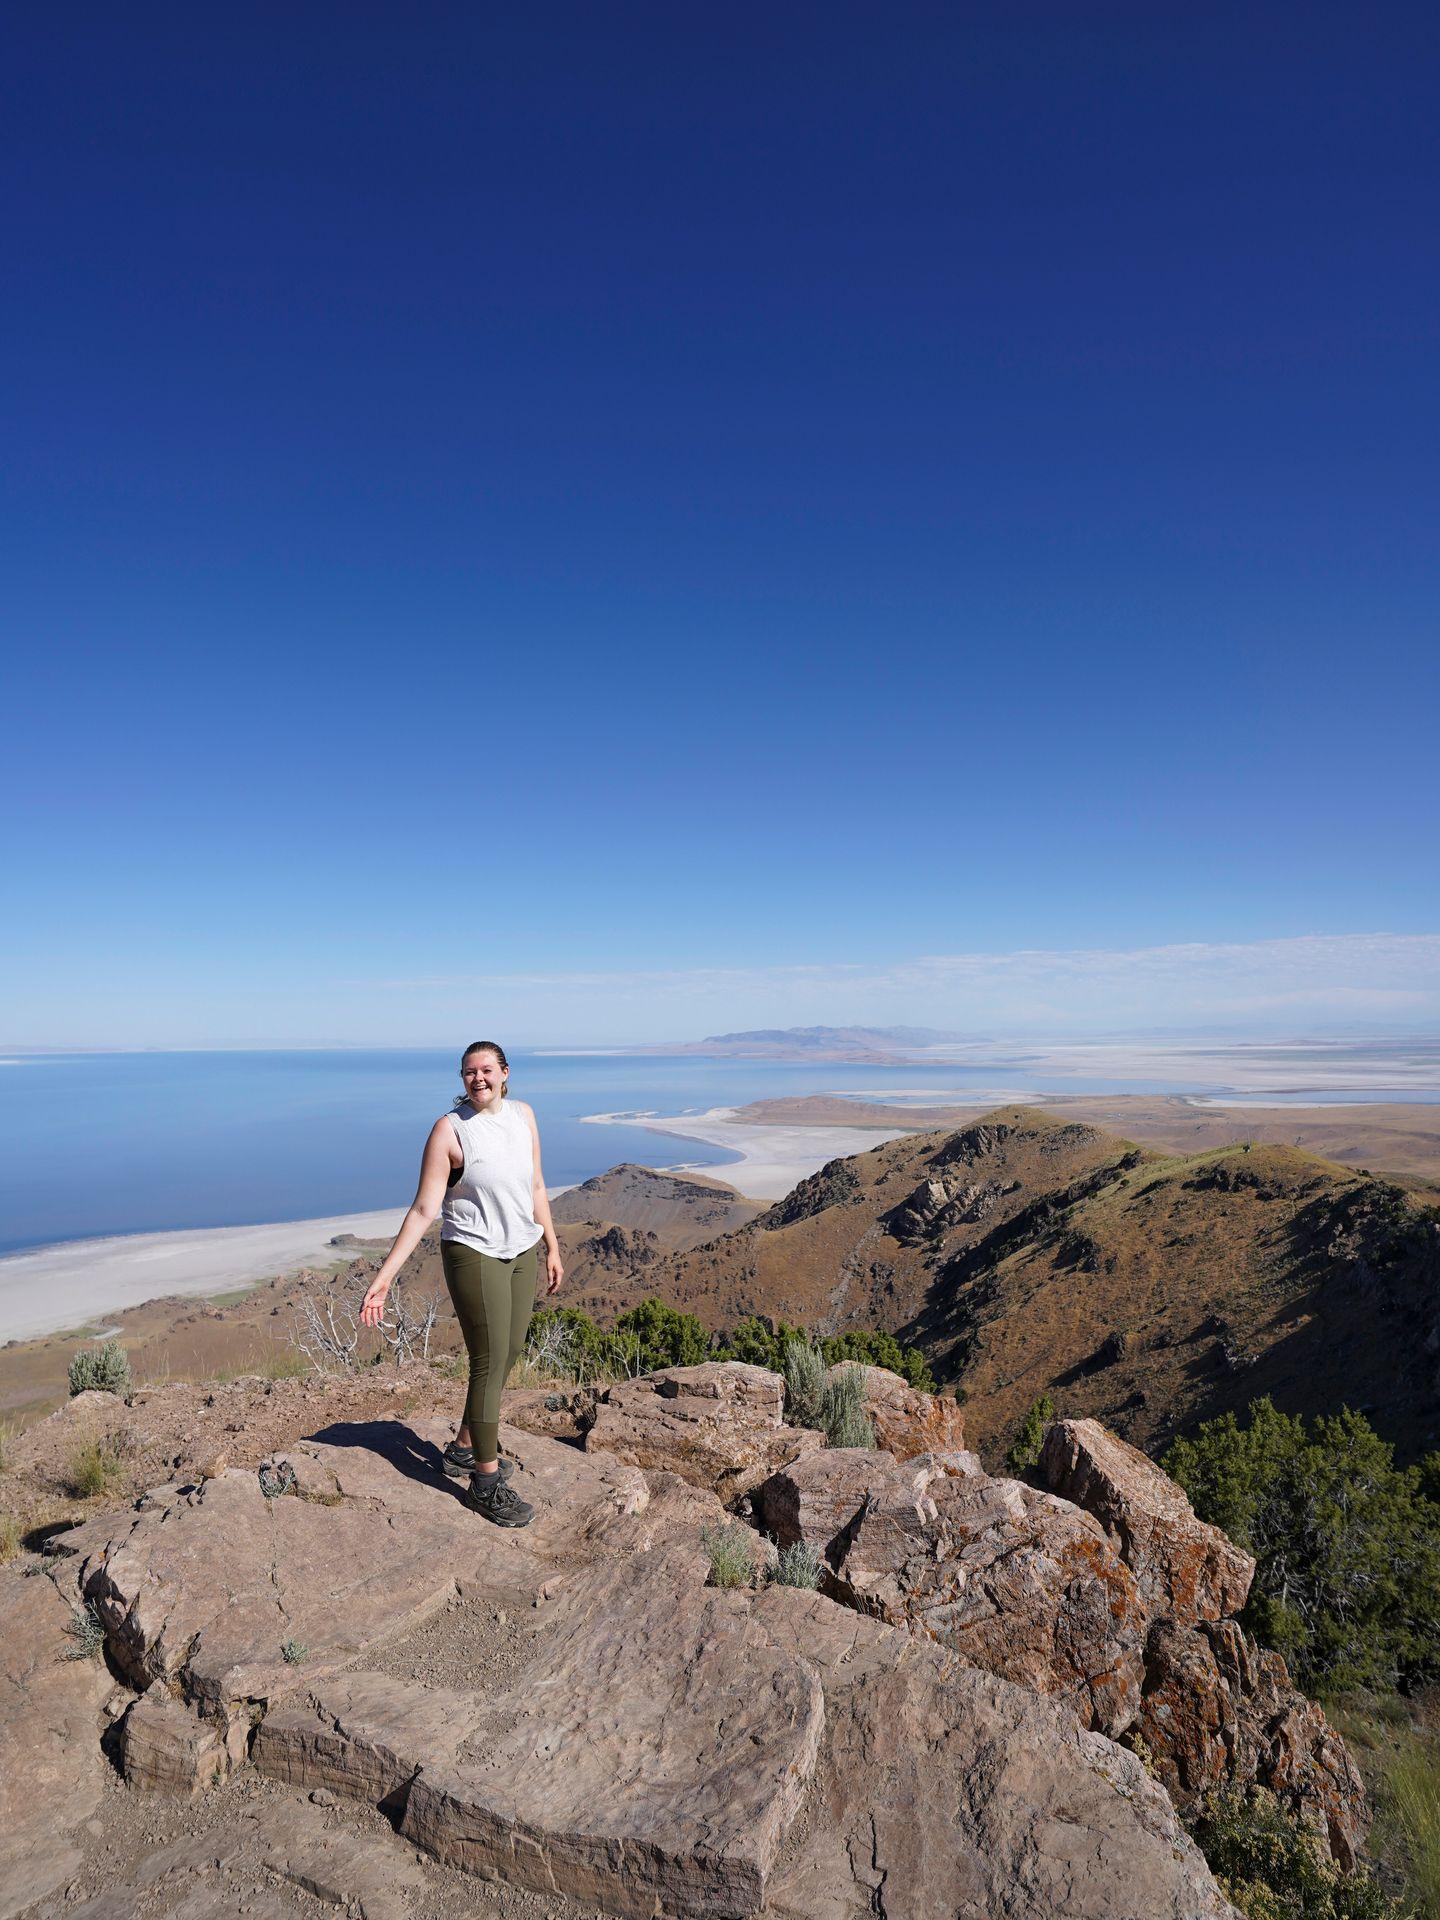 Lydia standing on top of Frary Peak with a view of the Great Salt Lake in the distance.